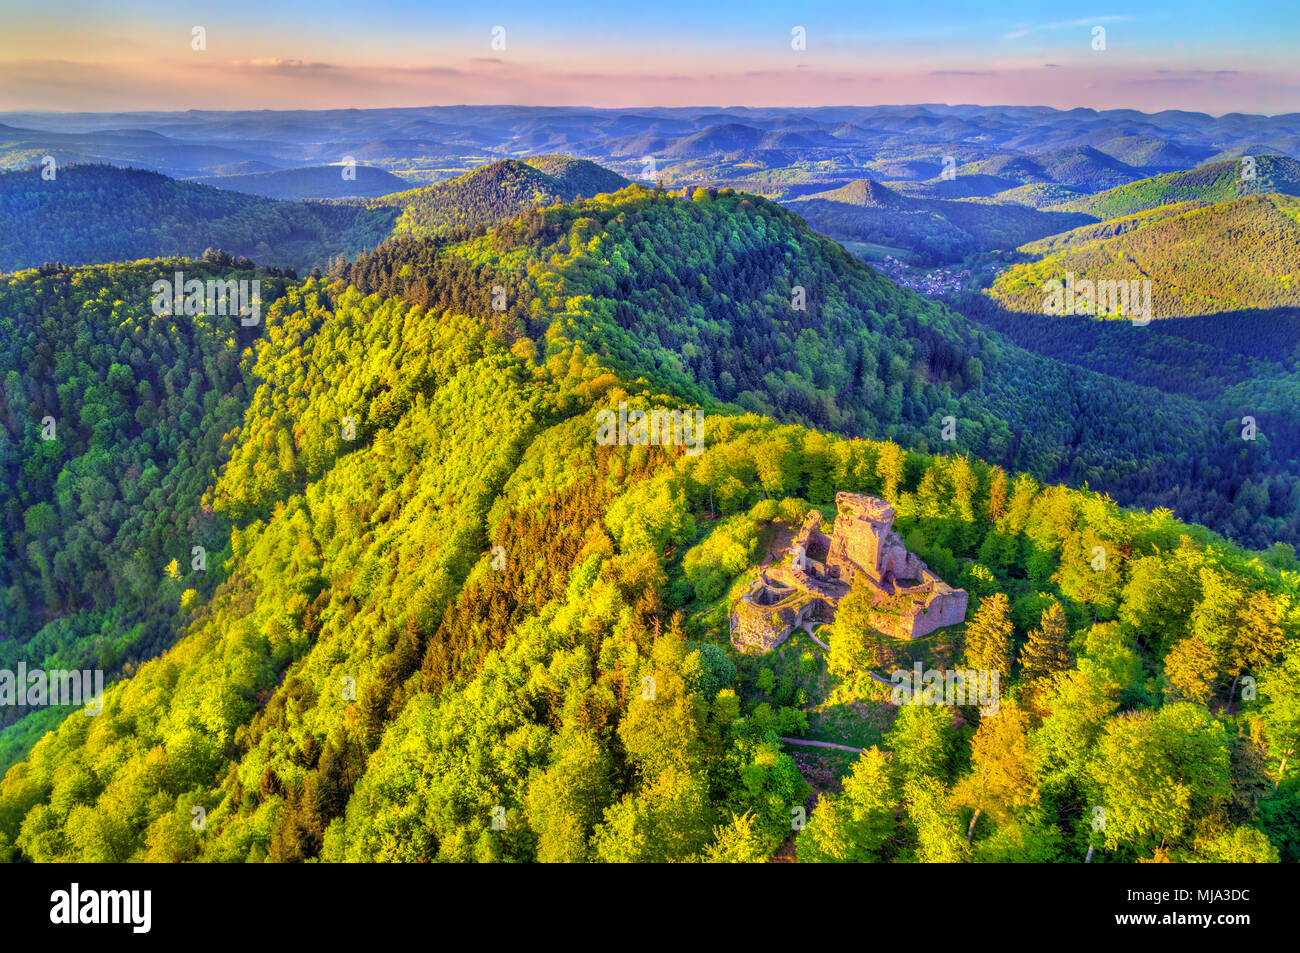 Chateau de Hohenbourg, a ruined castle in the Northern Vosges Mountains - Bas-Rhin, France Stock Photo